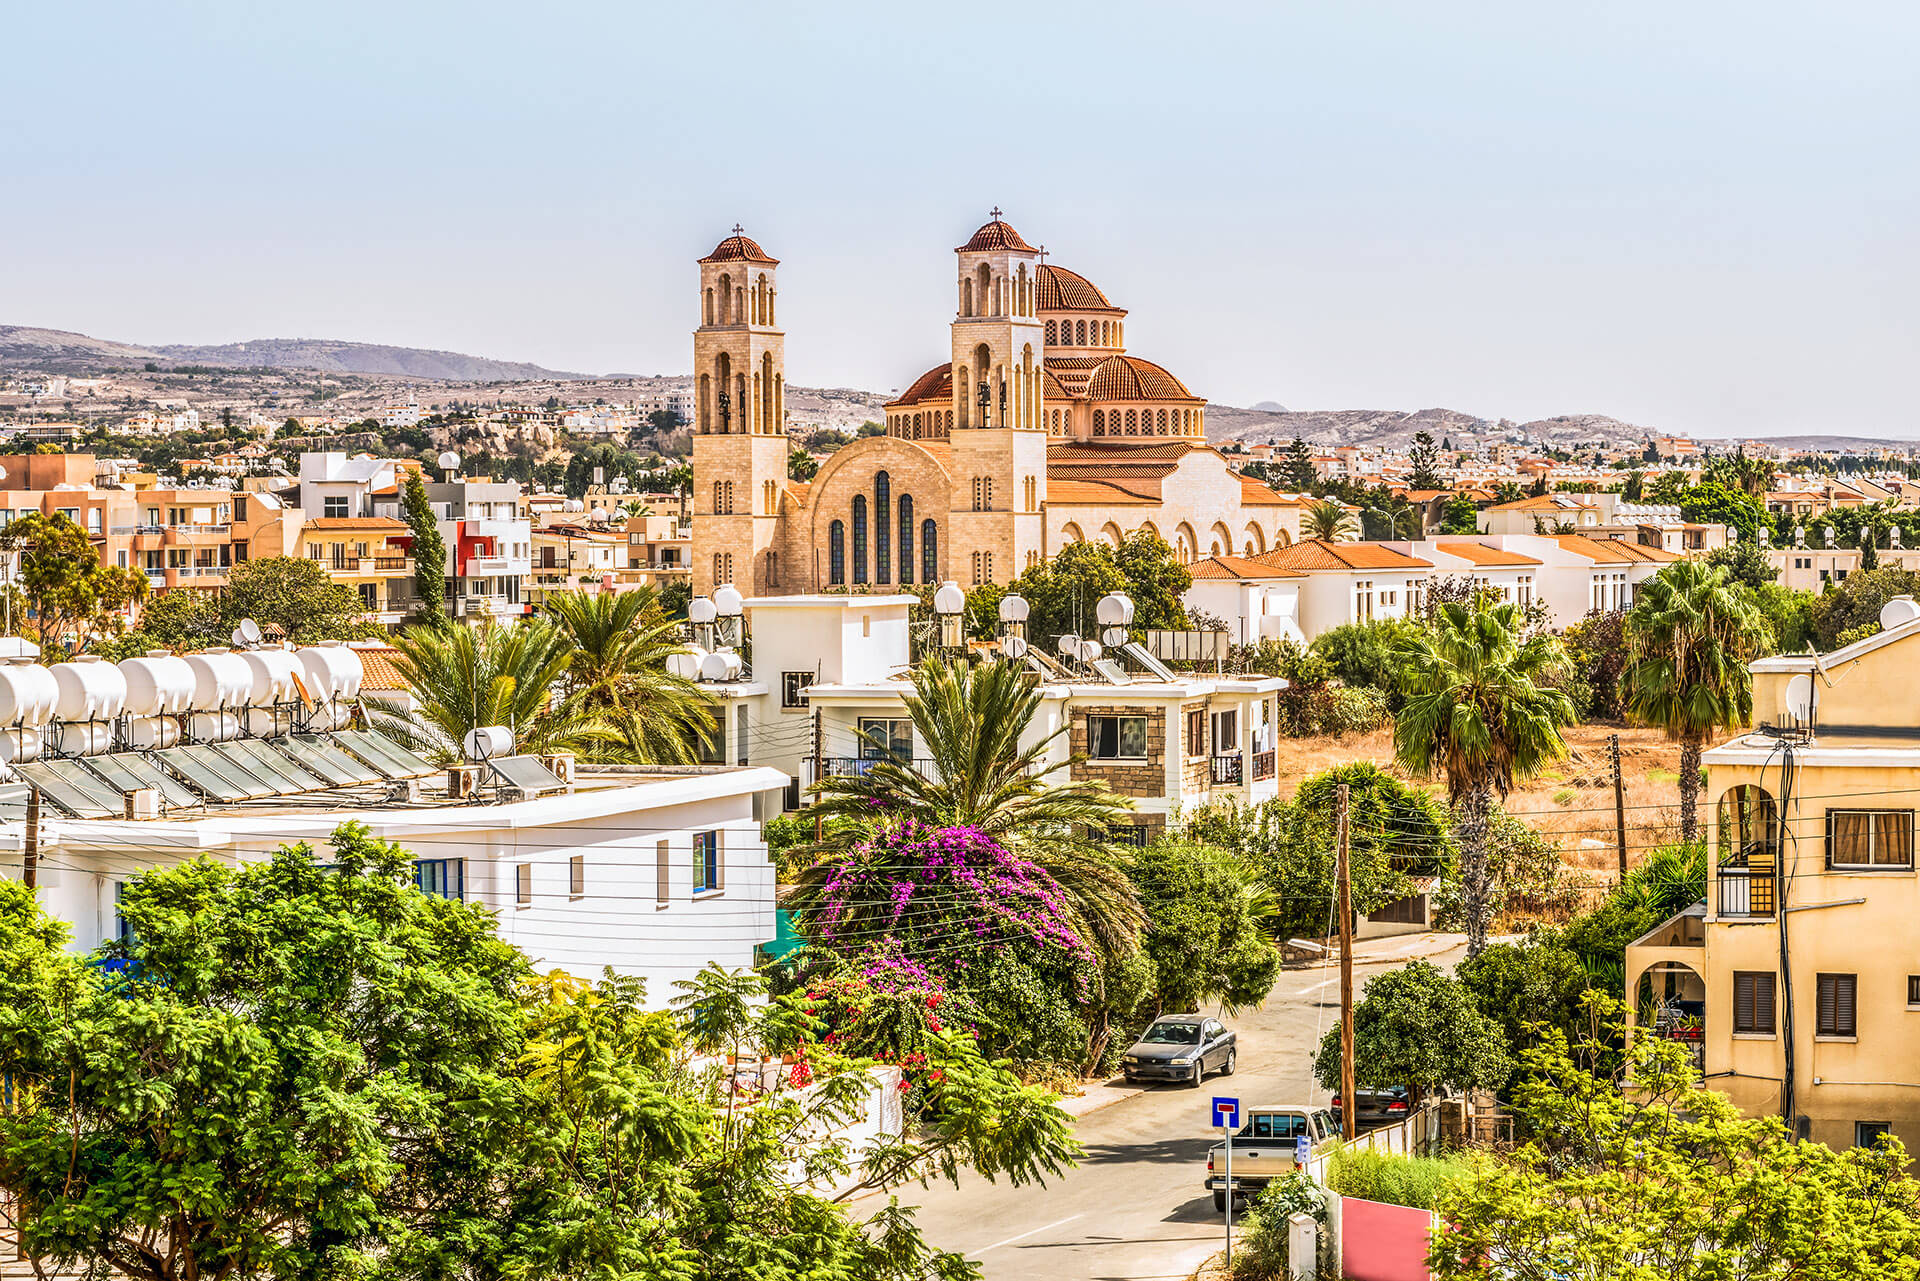 Paphos, the ancient city with old sandstone buildings, green trees, and a church with beautiful architecture, is from a city walking tour with Sky Bird Travel & Tours Sky Vacations luxury customized vacation package to Cyprus, Greece.